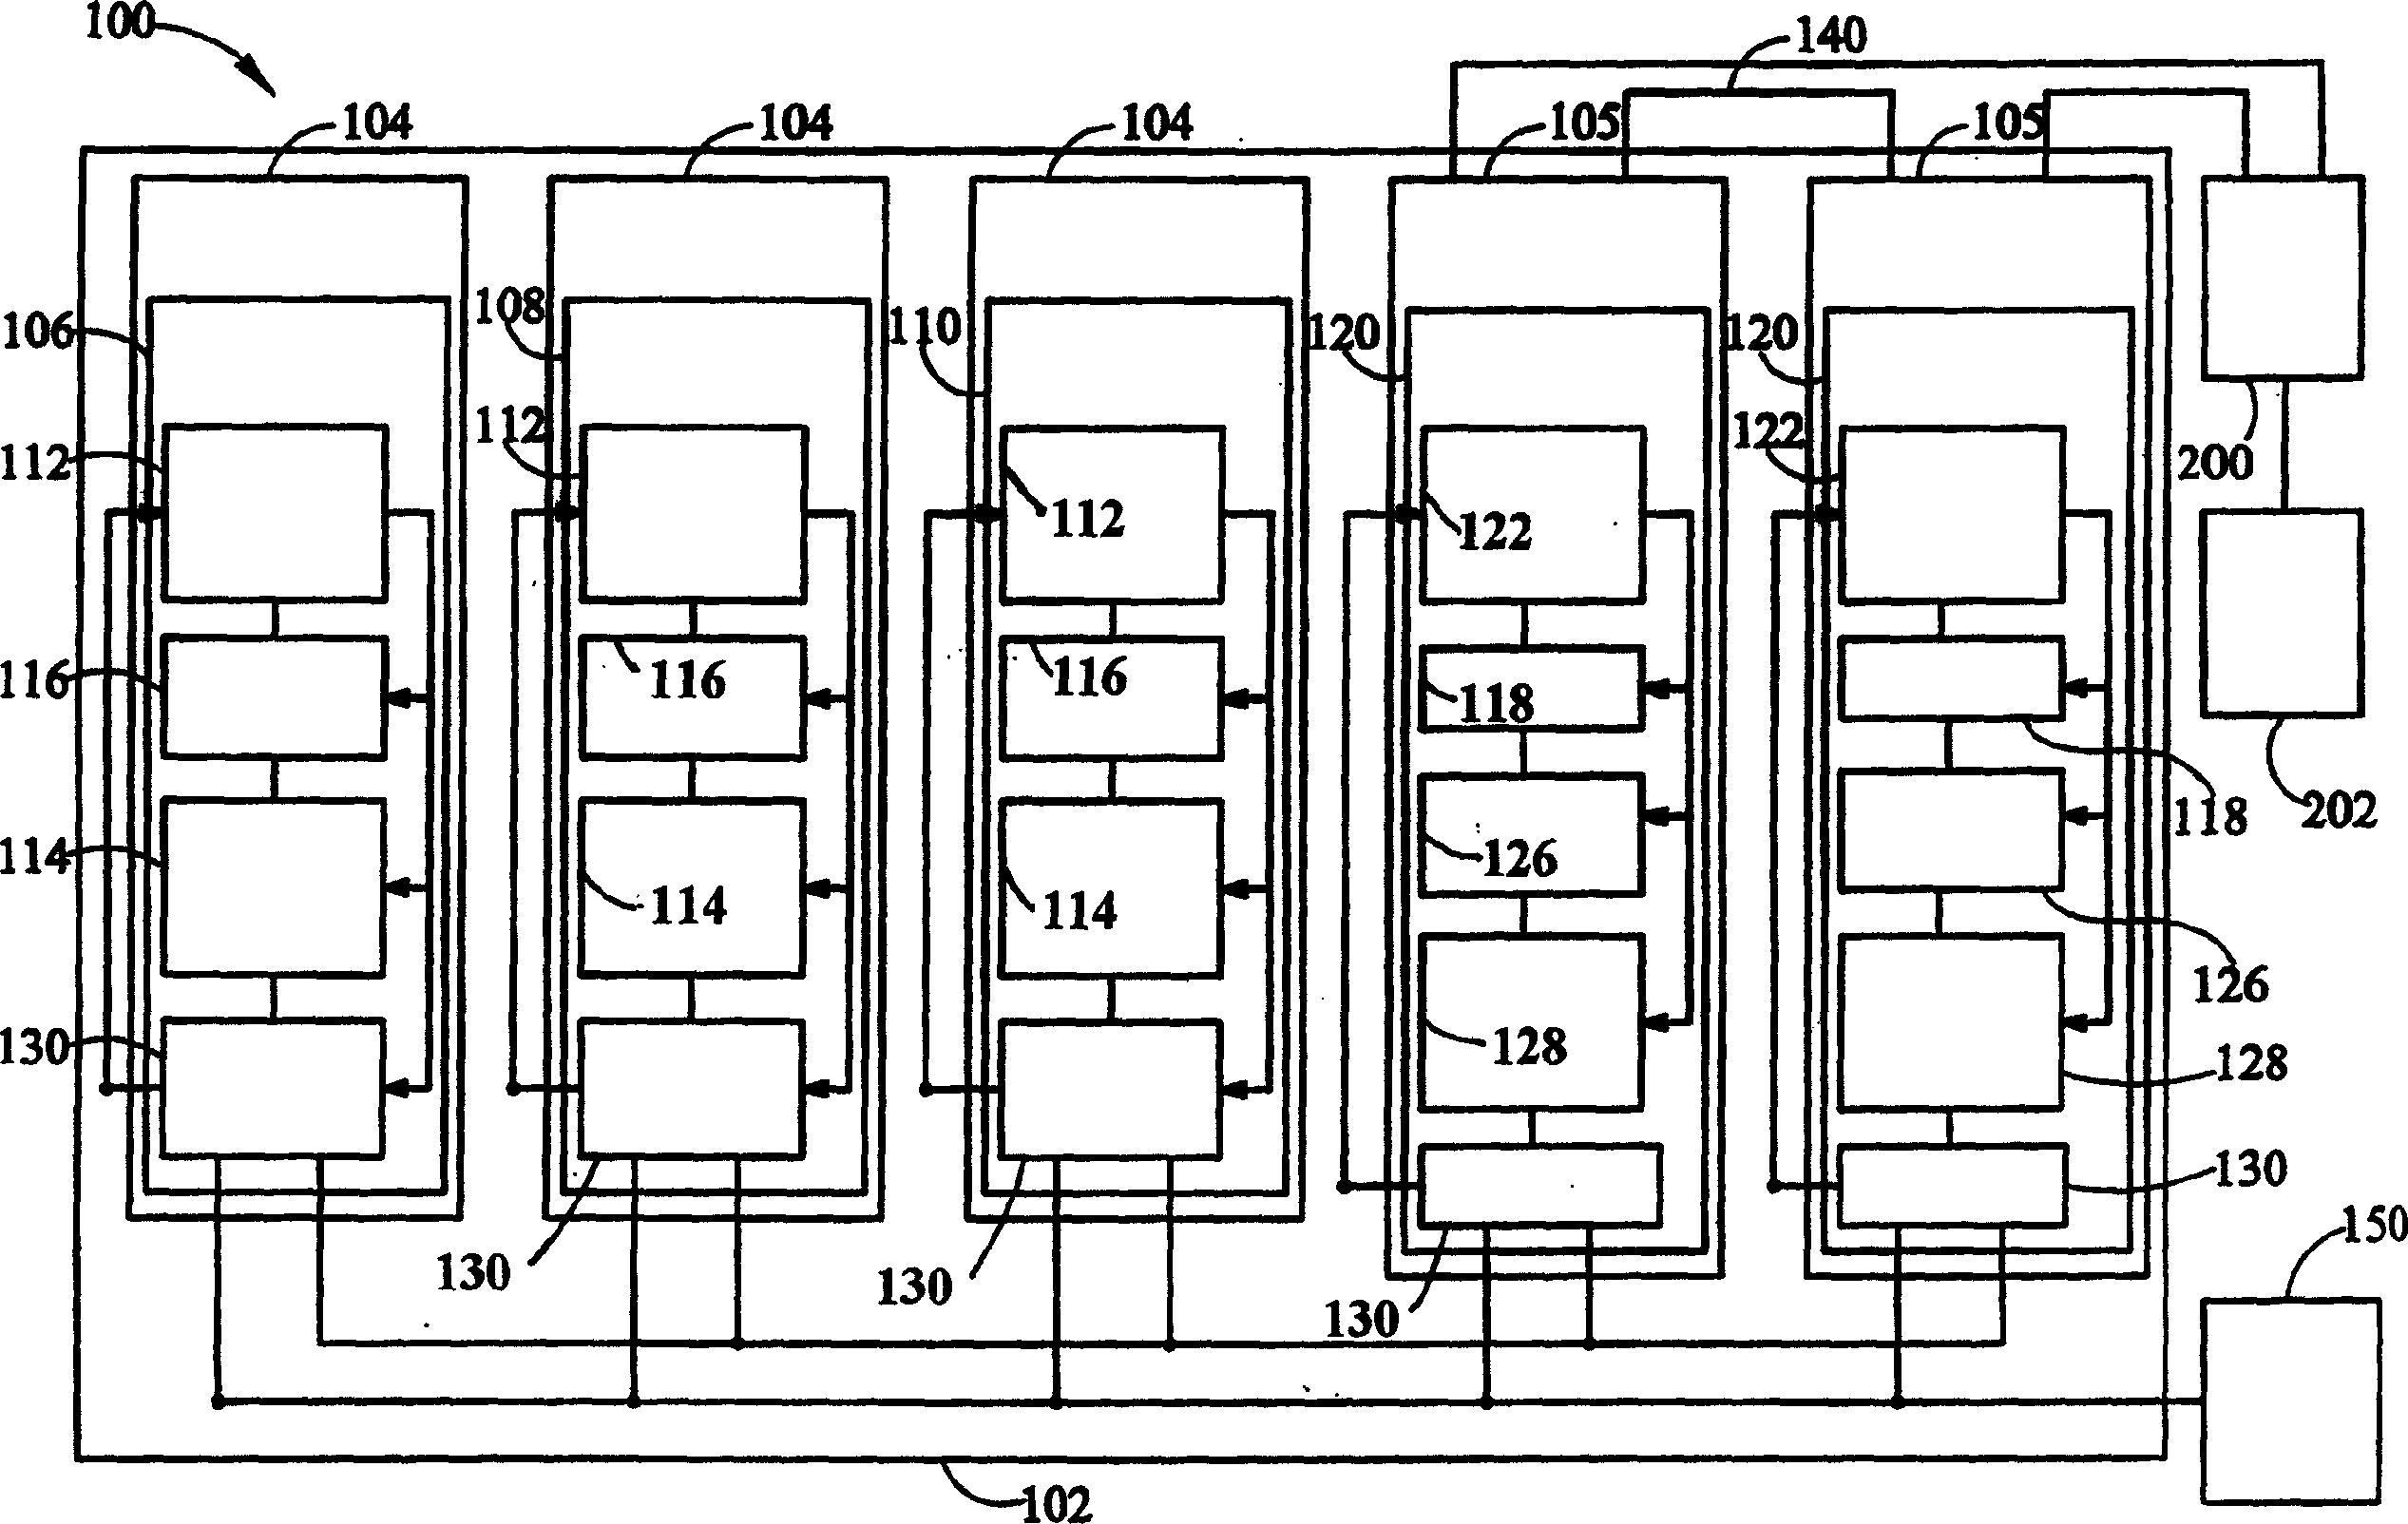 CPU accessory card capable of heat-exchanging on heat-exchange bus